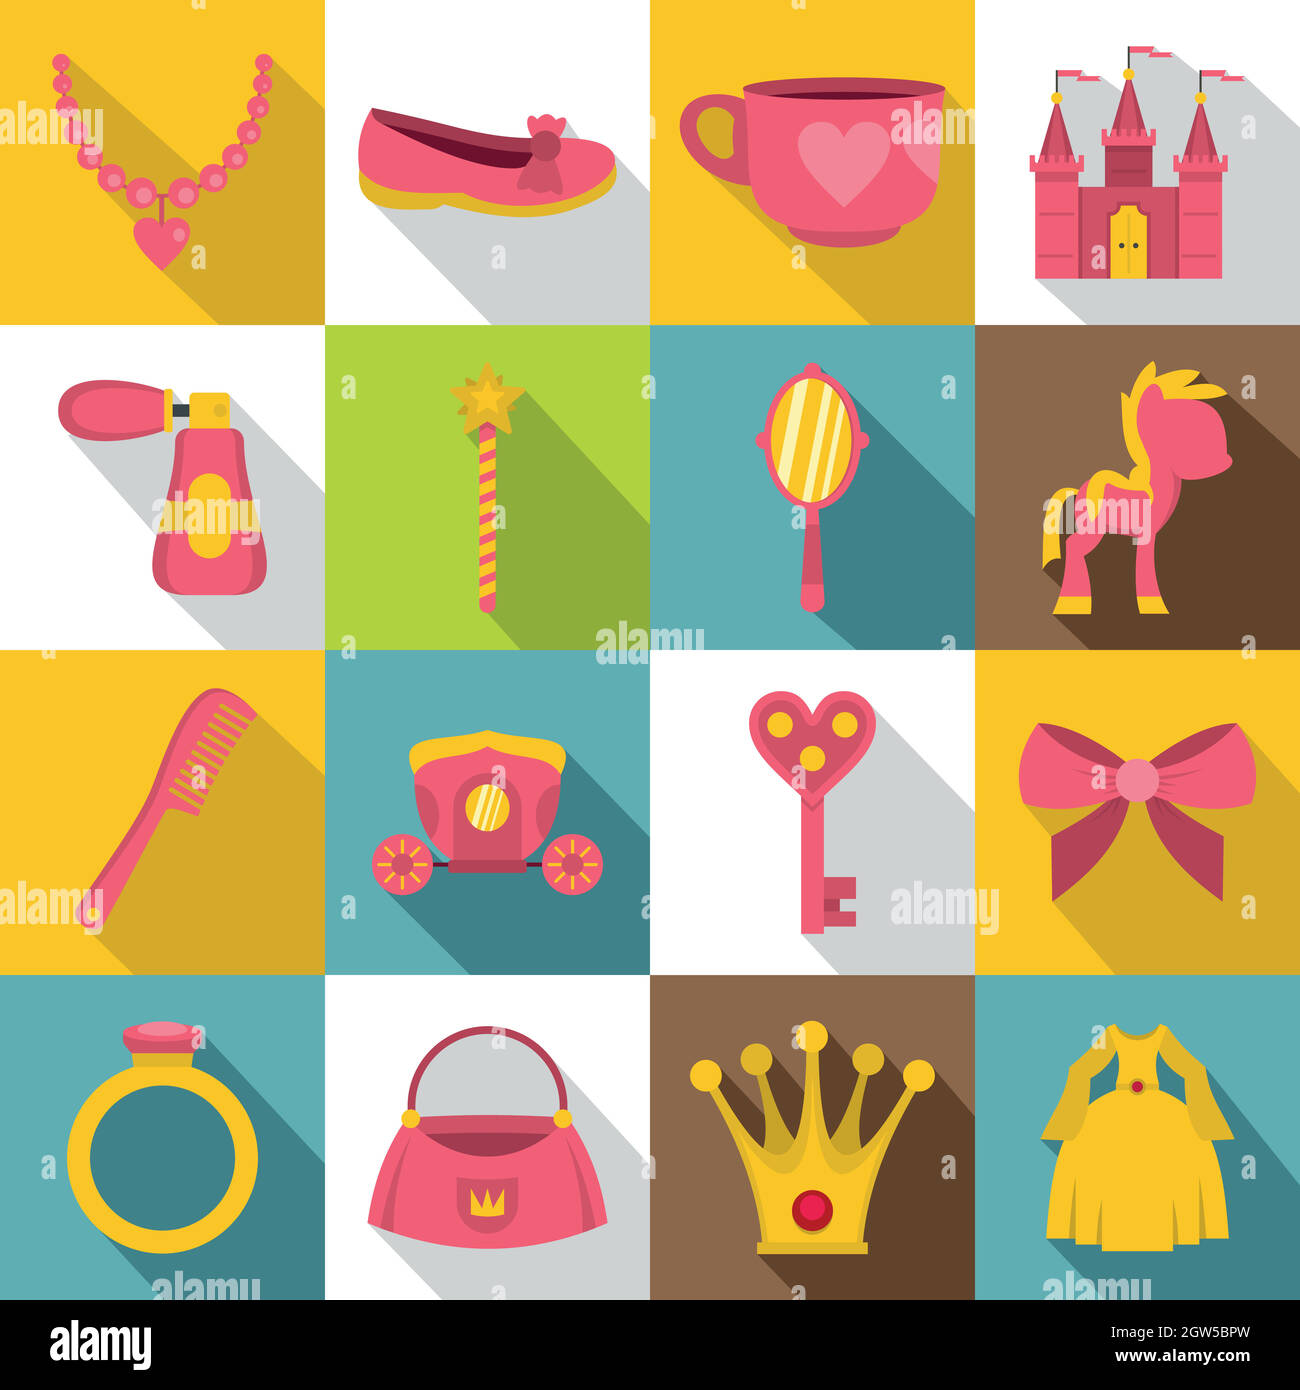 Doll princess items icons set, flat style Stock Vector